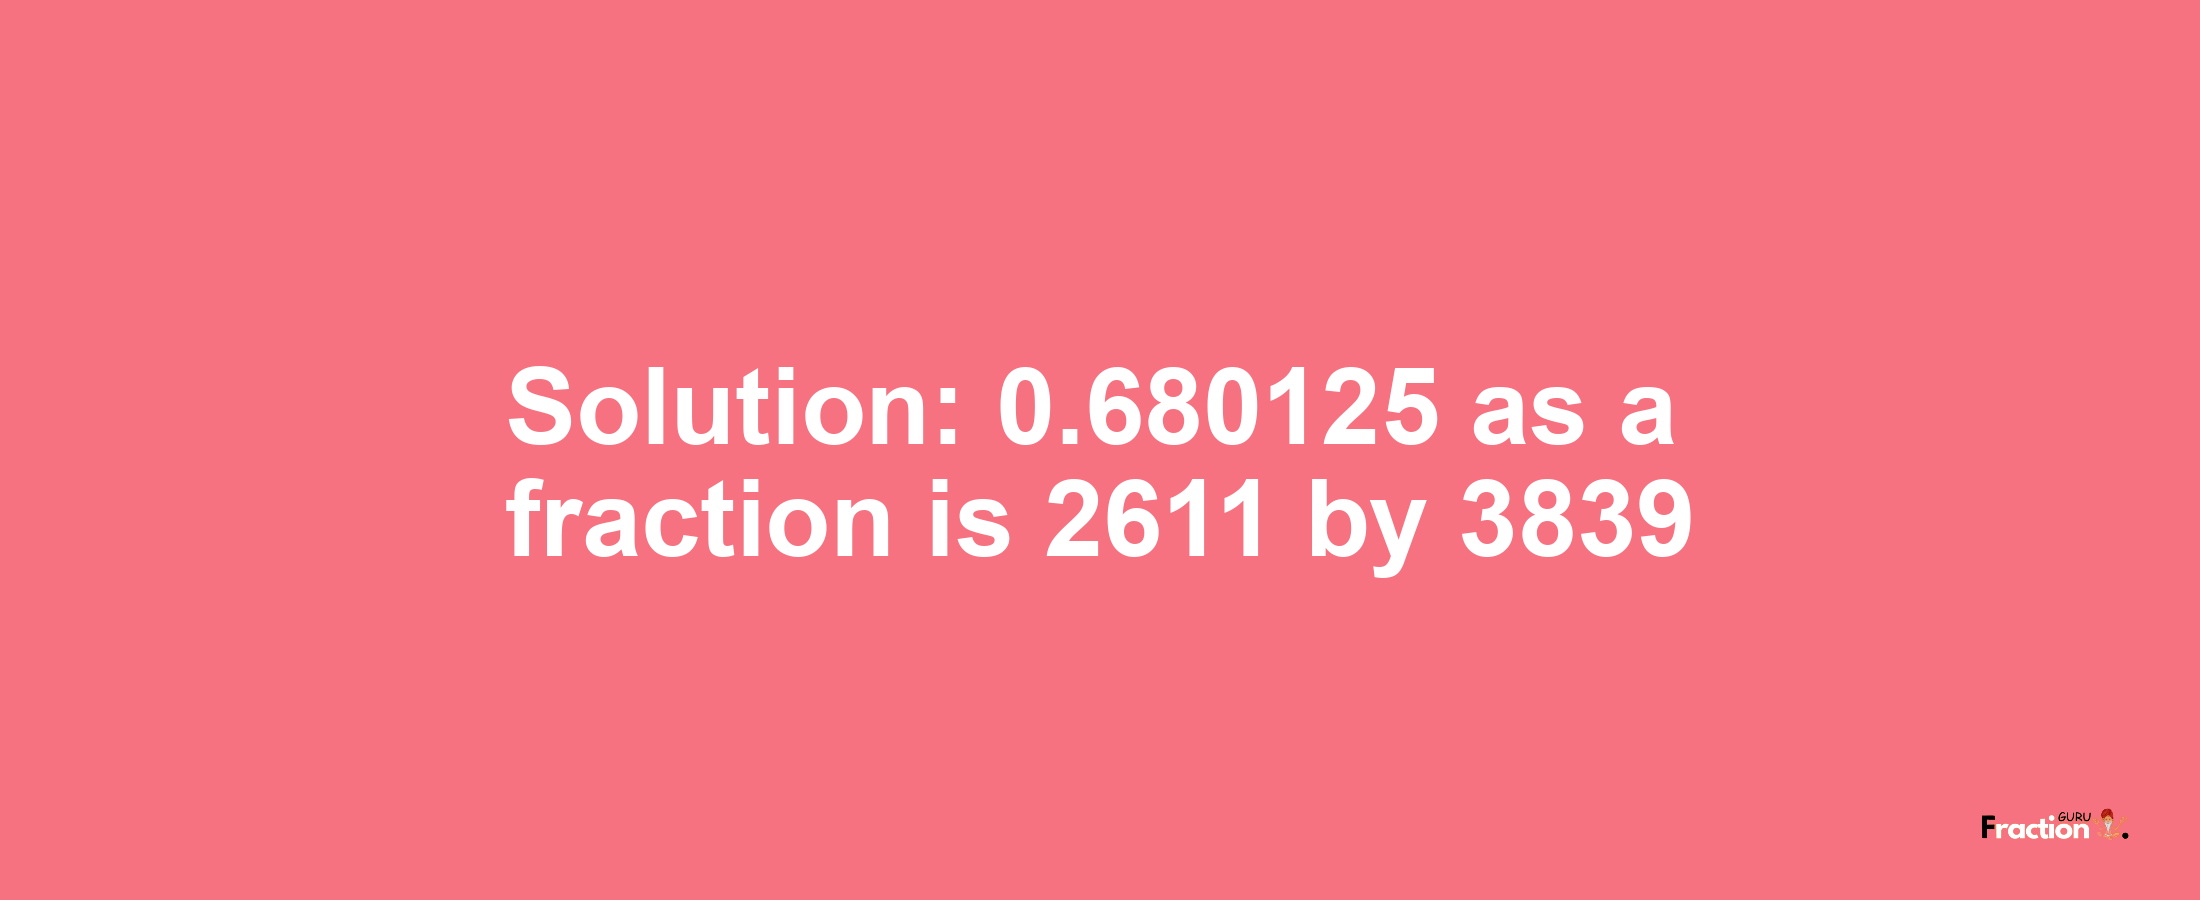 Solution:0.680125 as a fraction is 2611/3839